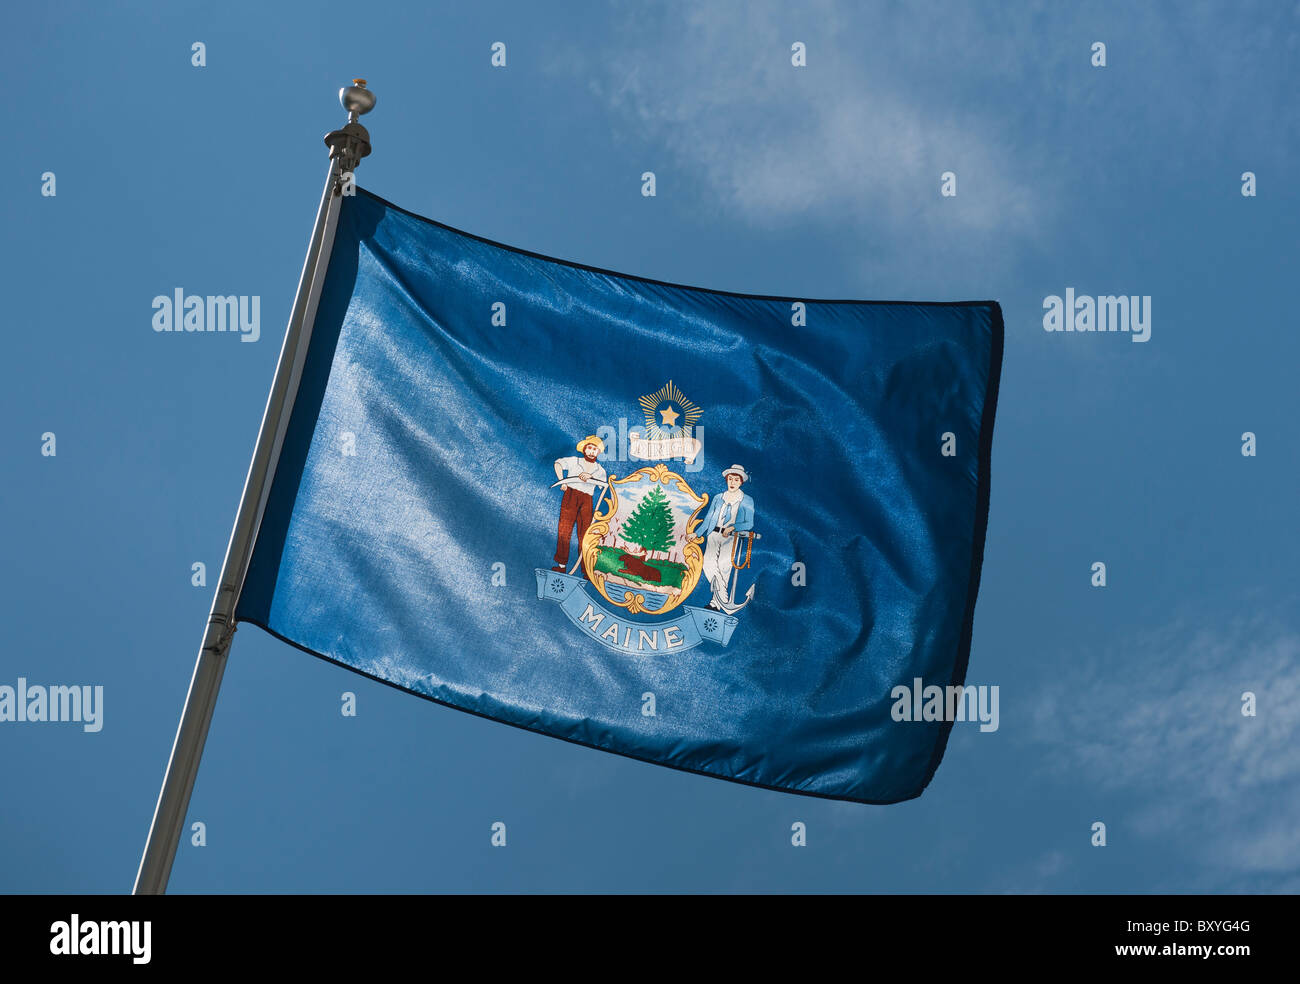 Maine State flag against sky Banque D'Images